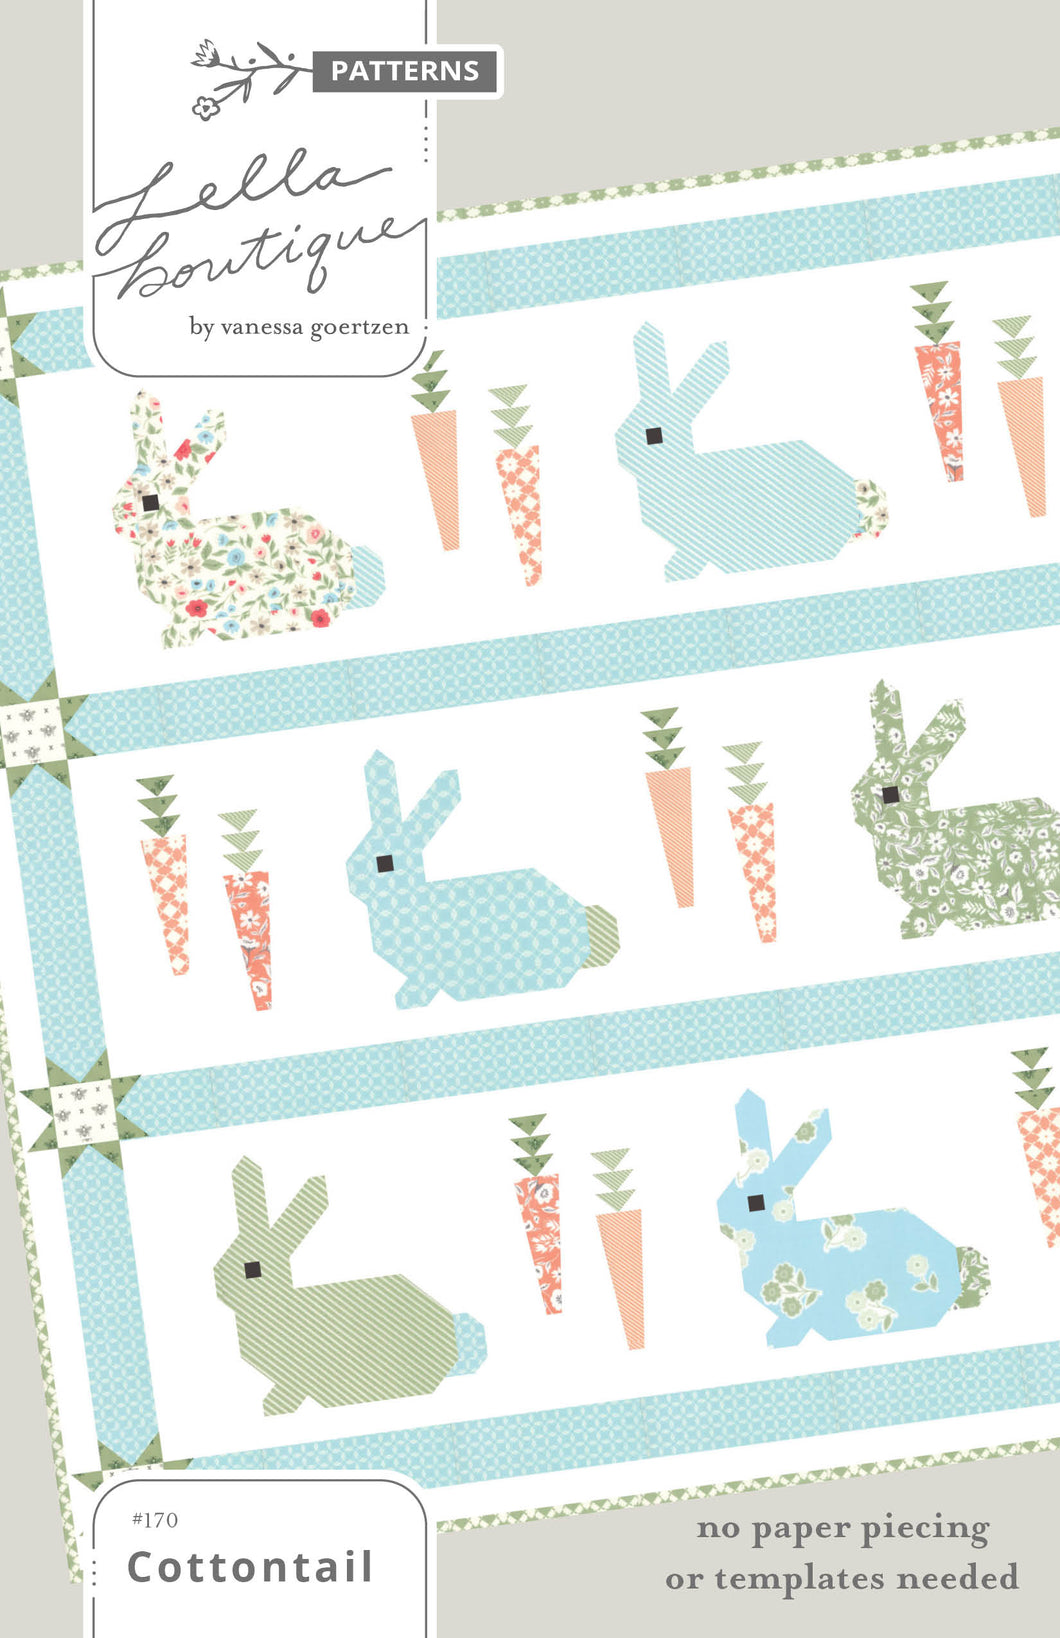 Cottontail bunny and carrot quilt pattern in Garden Variety fabric by Lella Boutique for Moda. Cutest rabbit quilt for Easter!